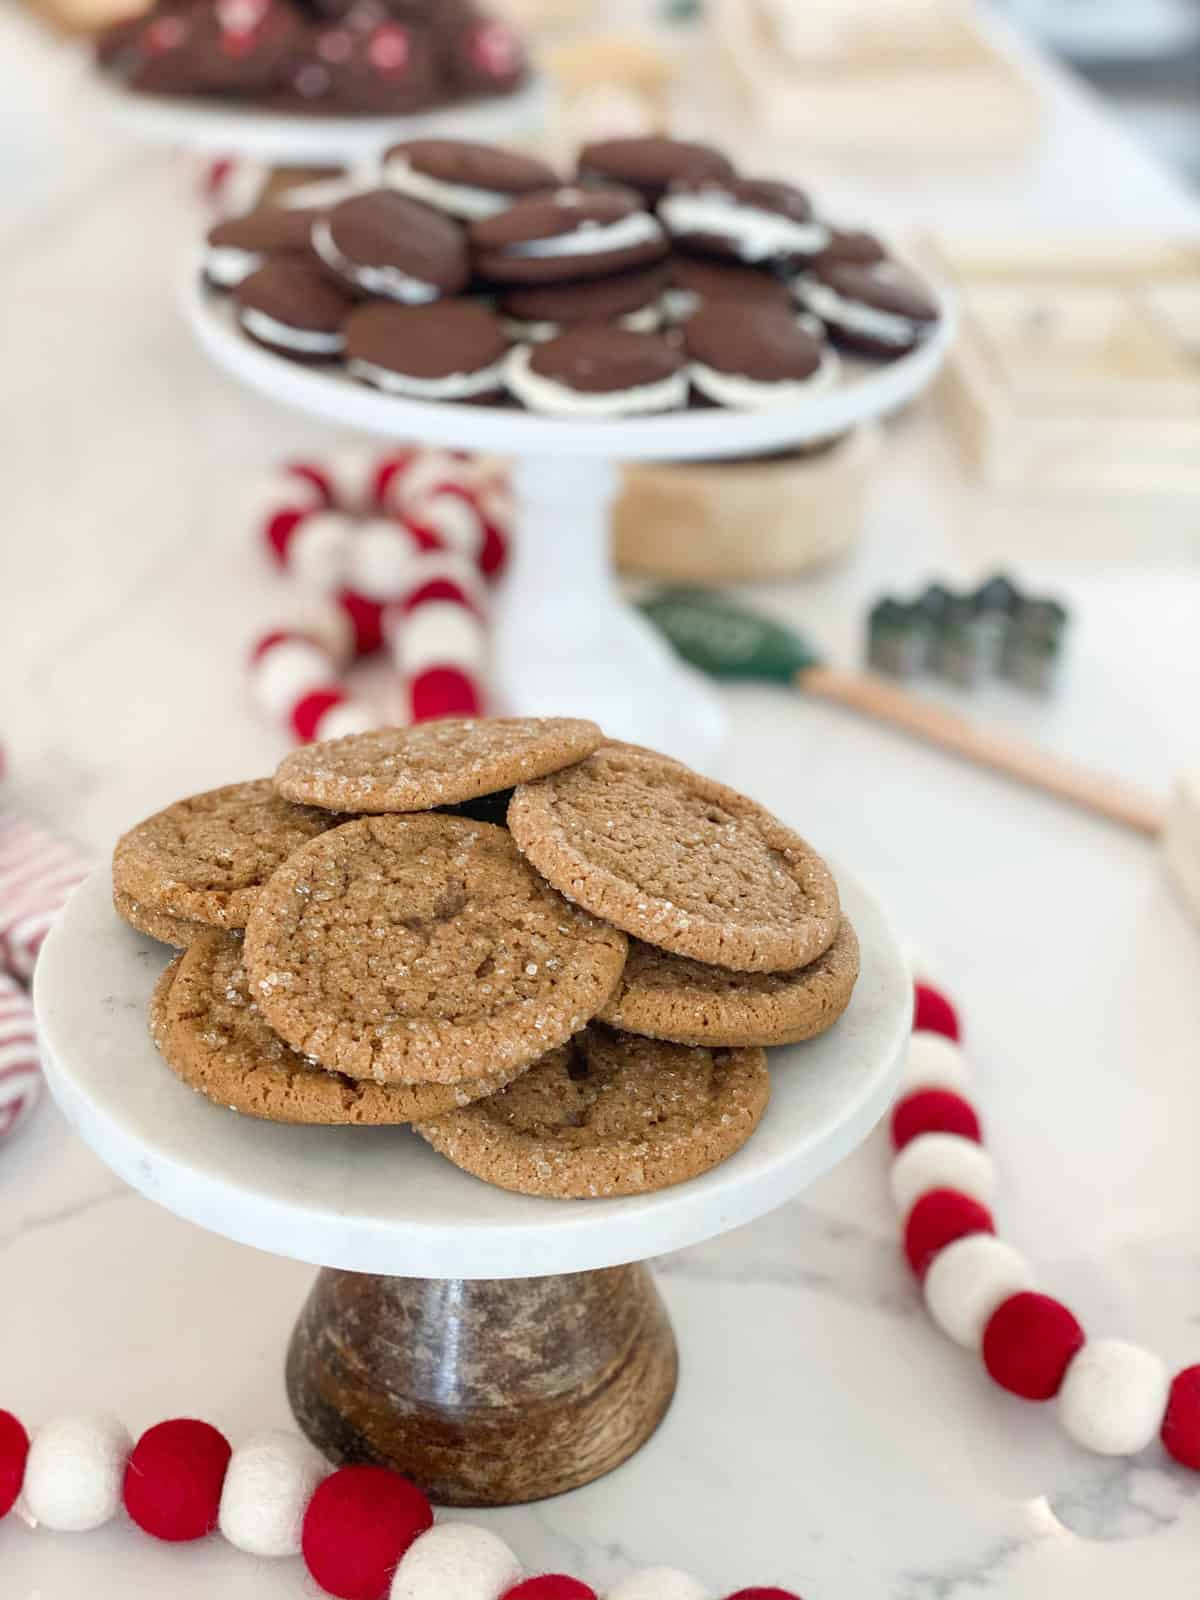 Ginger molasses cookies on a cake stand